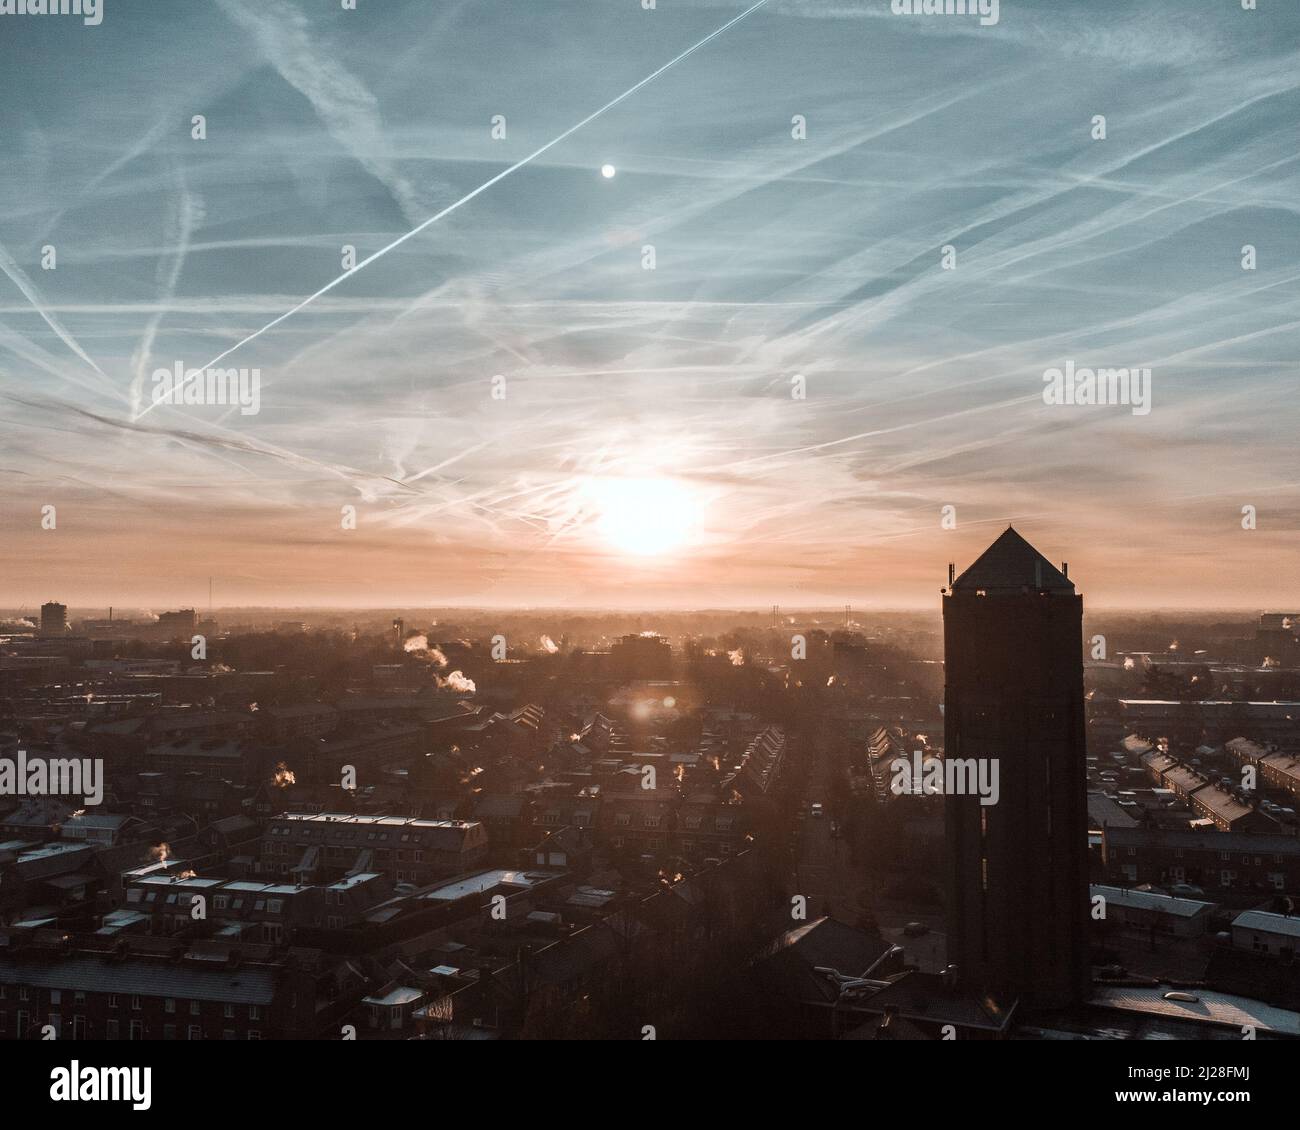 A scenic view of lots of contrails in the sky over the city Stock Photo